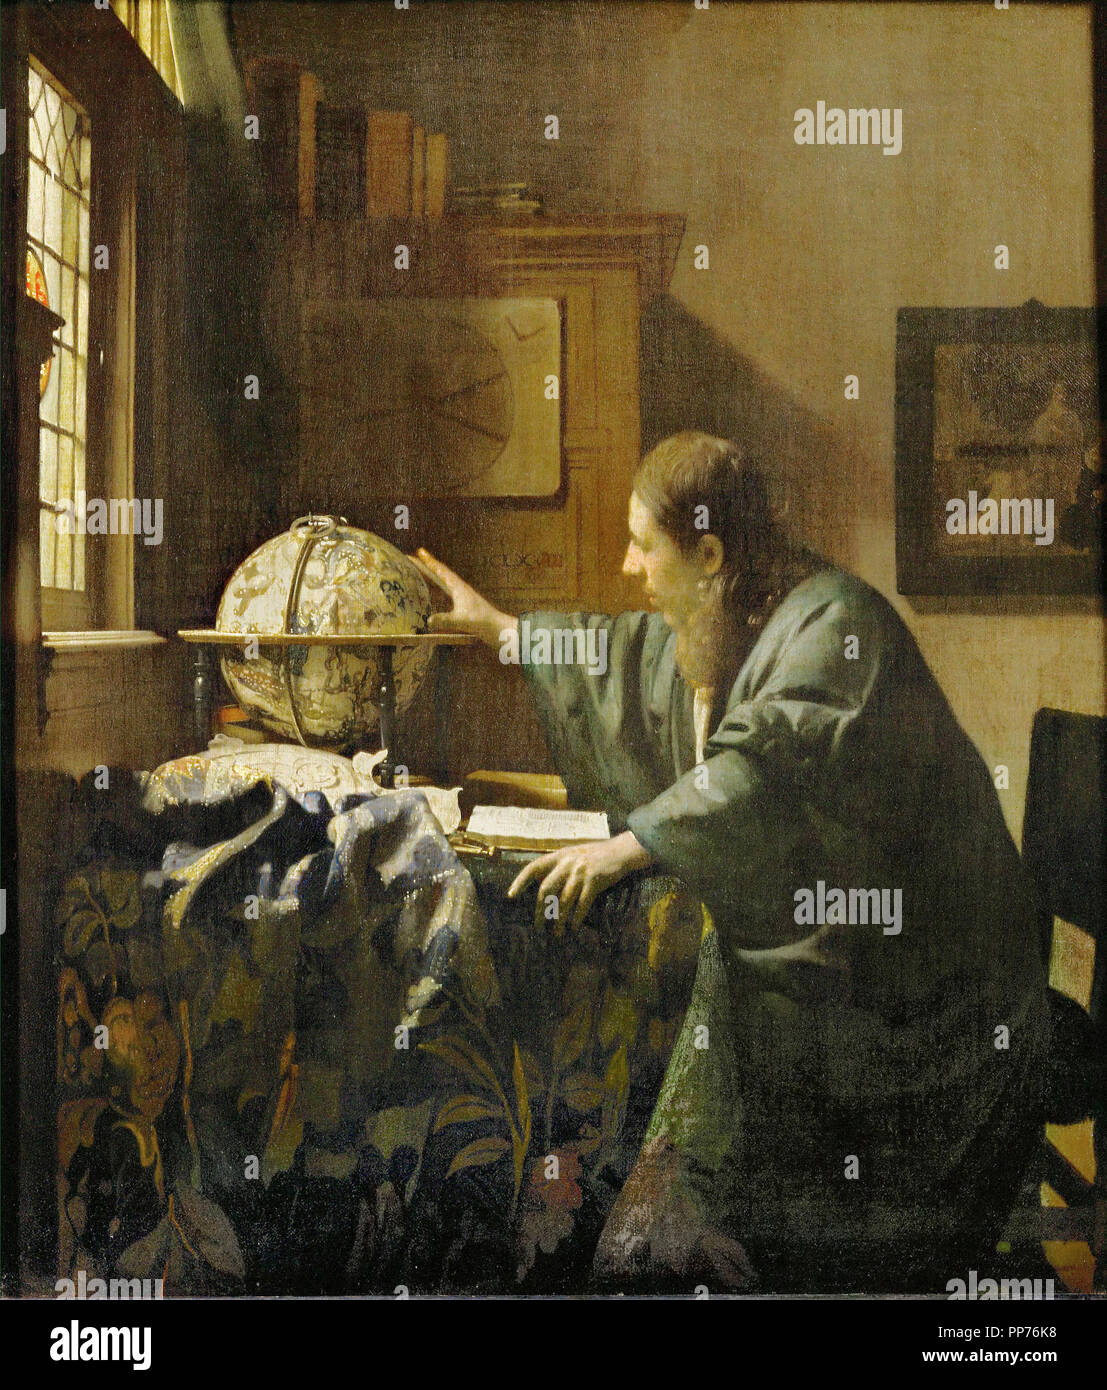 Johannes Vermeer / 'The Astronomer', c. 1668, Oil on canvas, 51 x 45 cm. Museum: MUSEE DU LOUVRE. Stock Photo